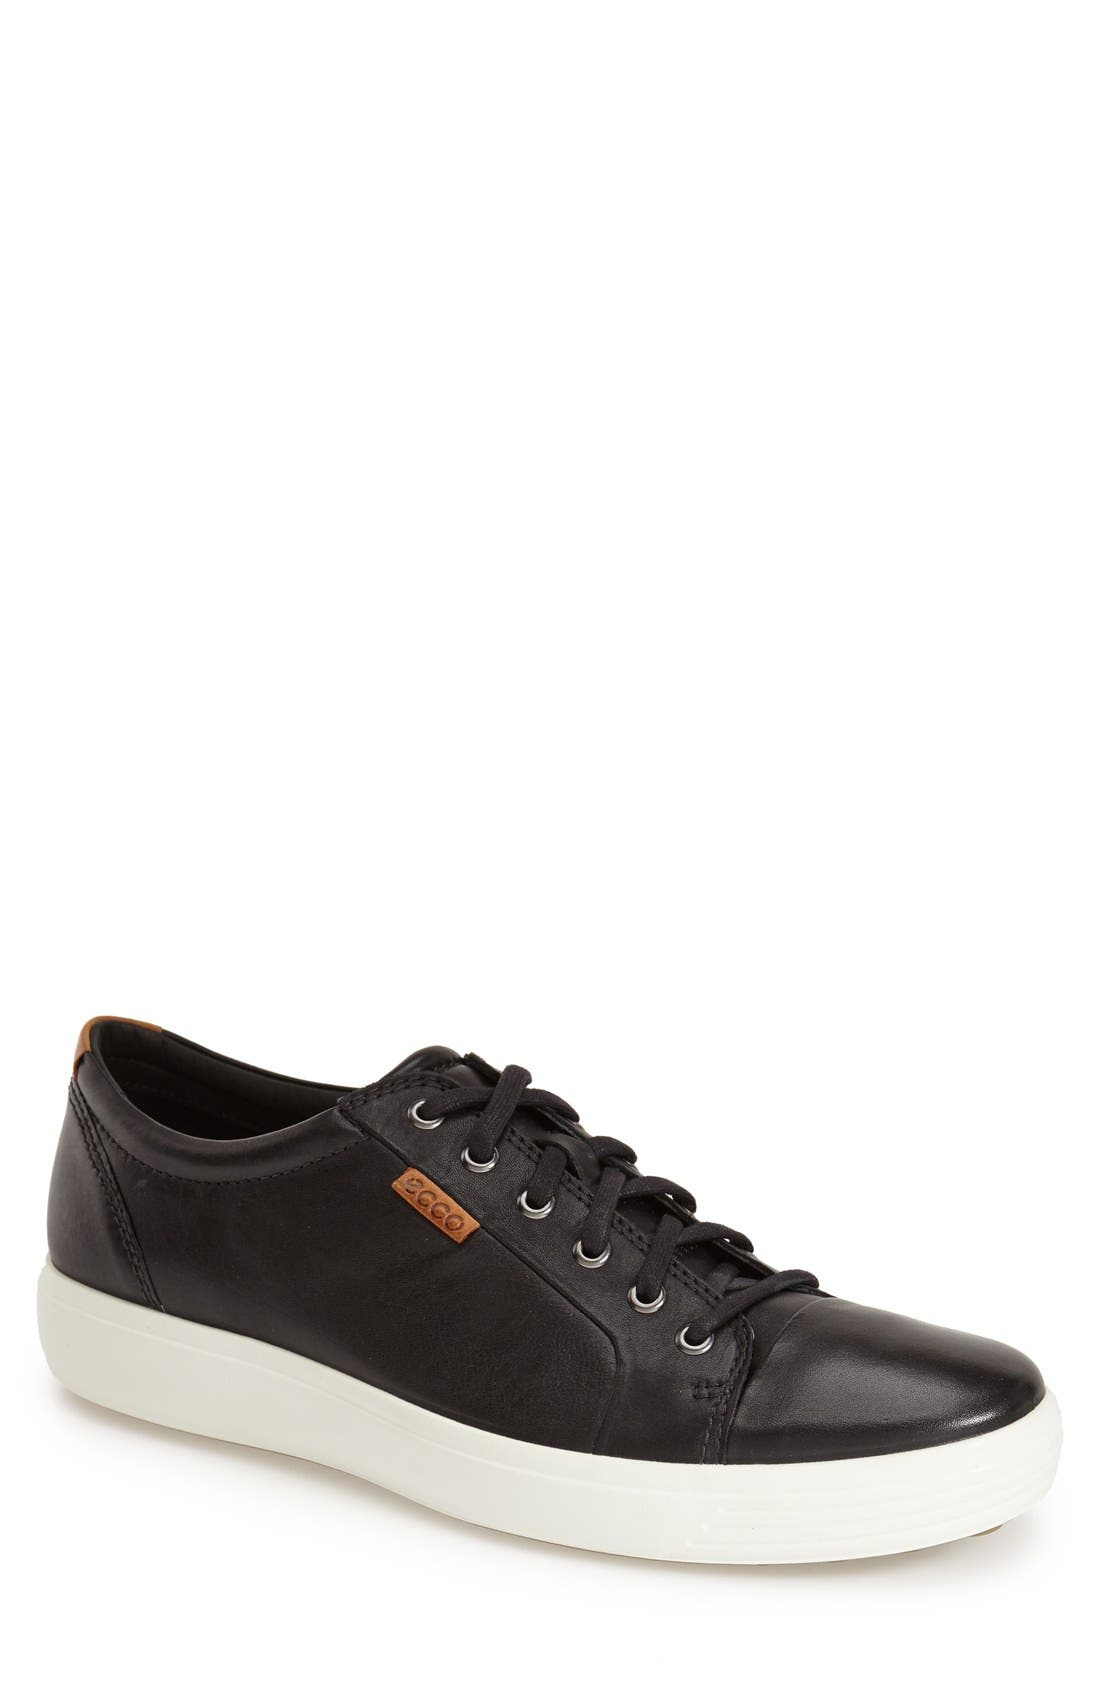 ecco leather sneakers mens